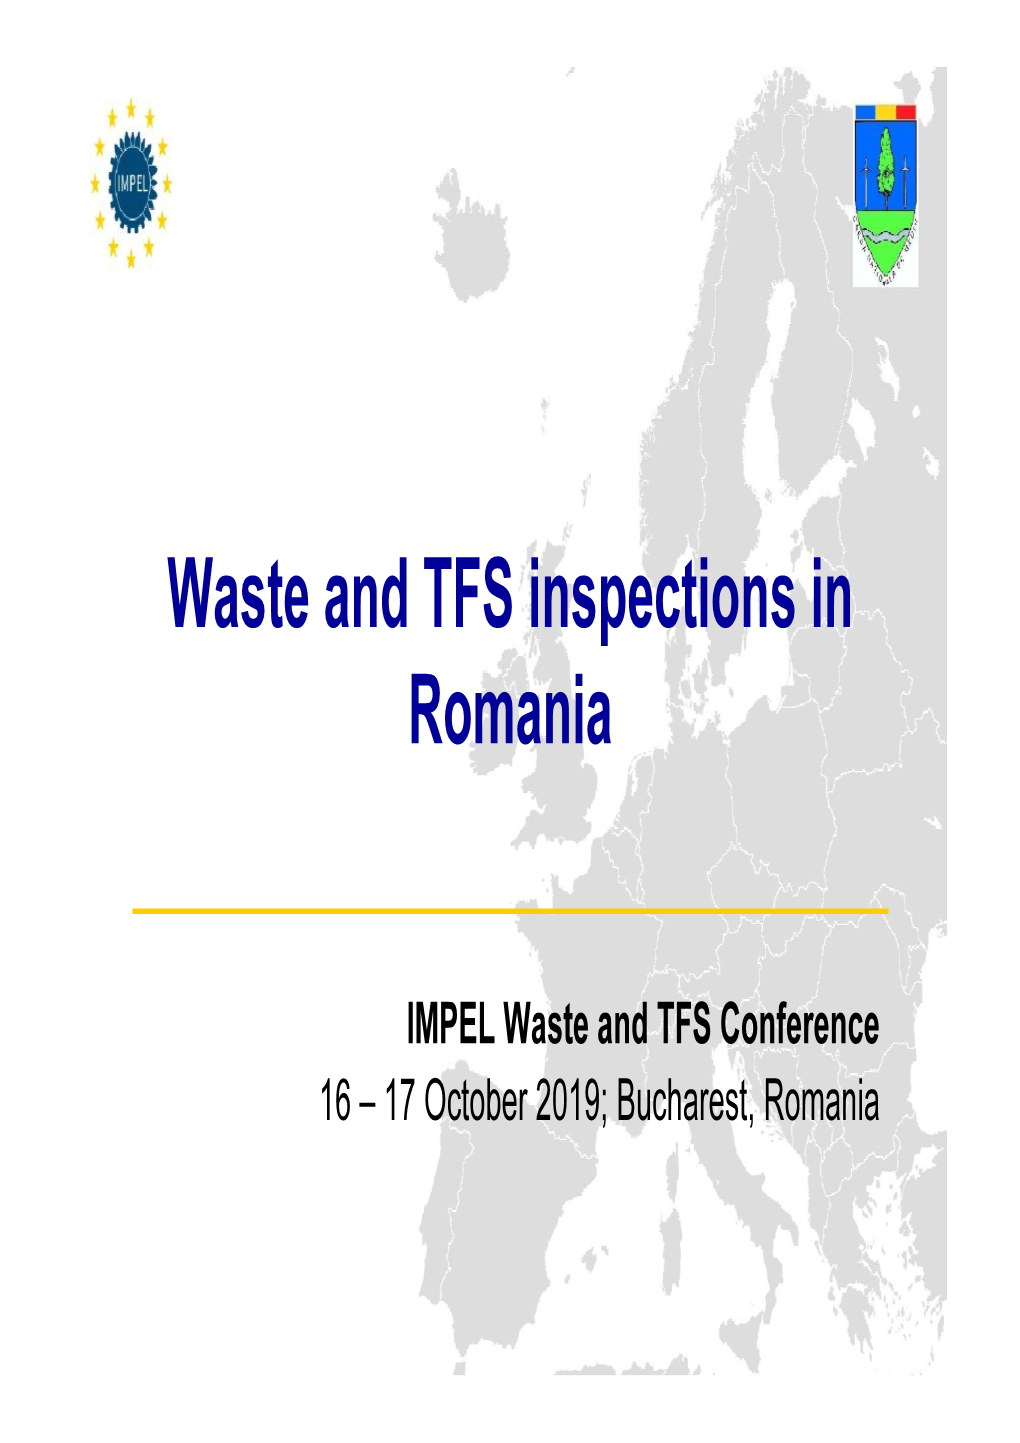 Waste and TFS Inspections in Romania